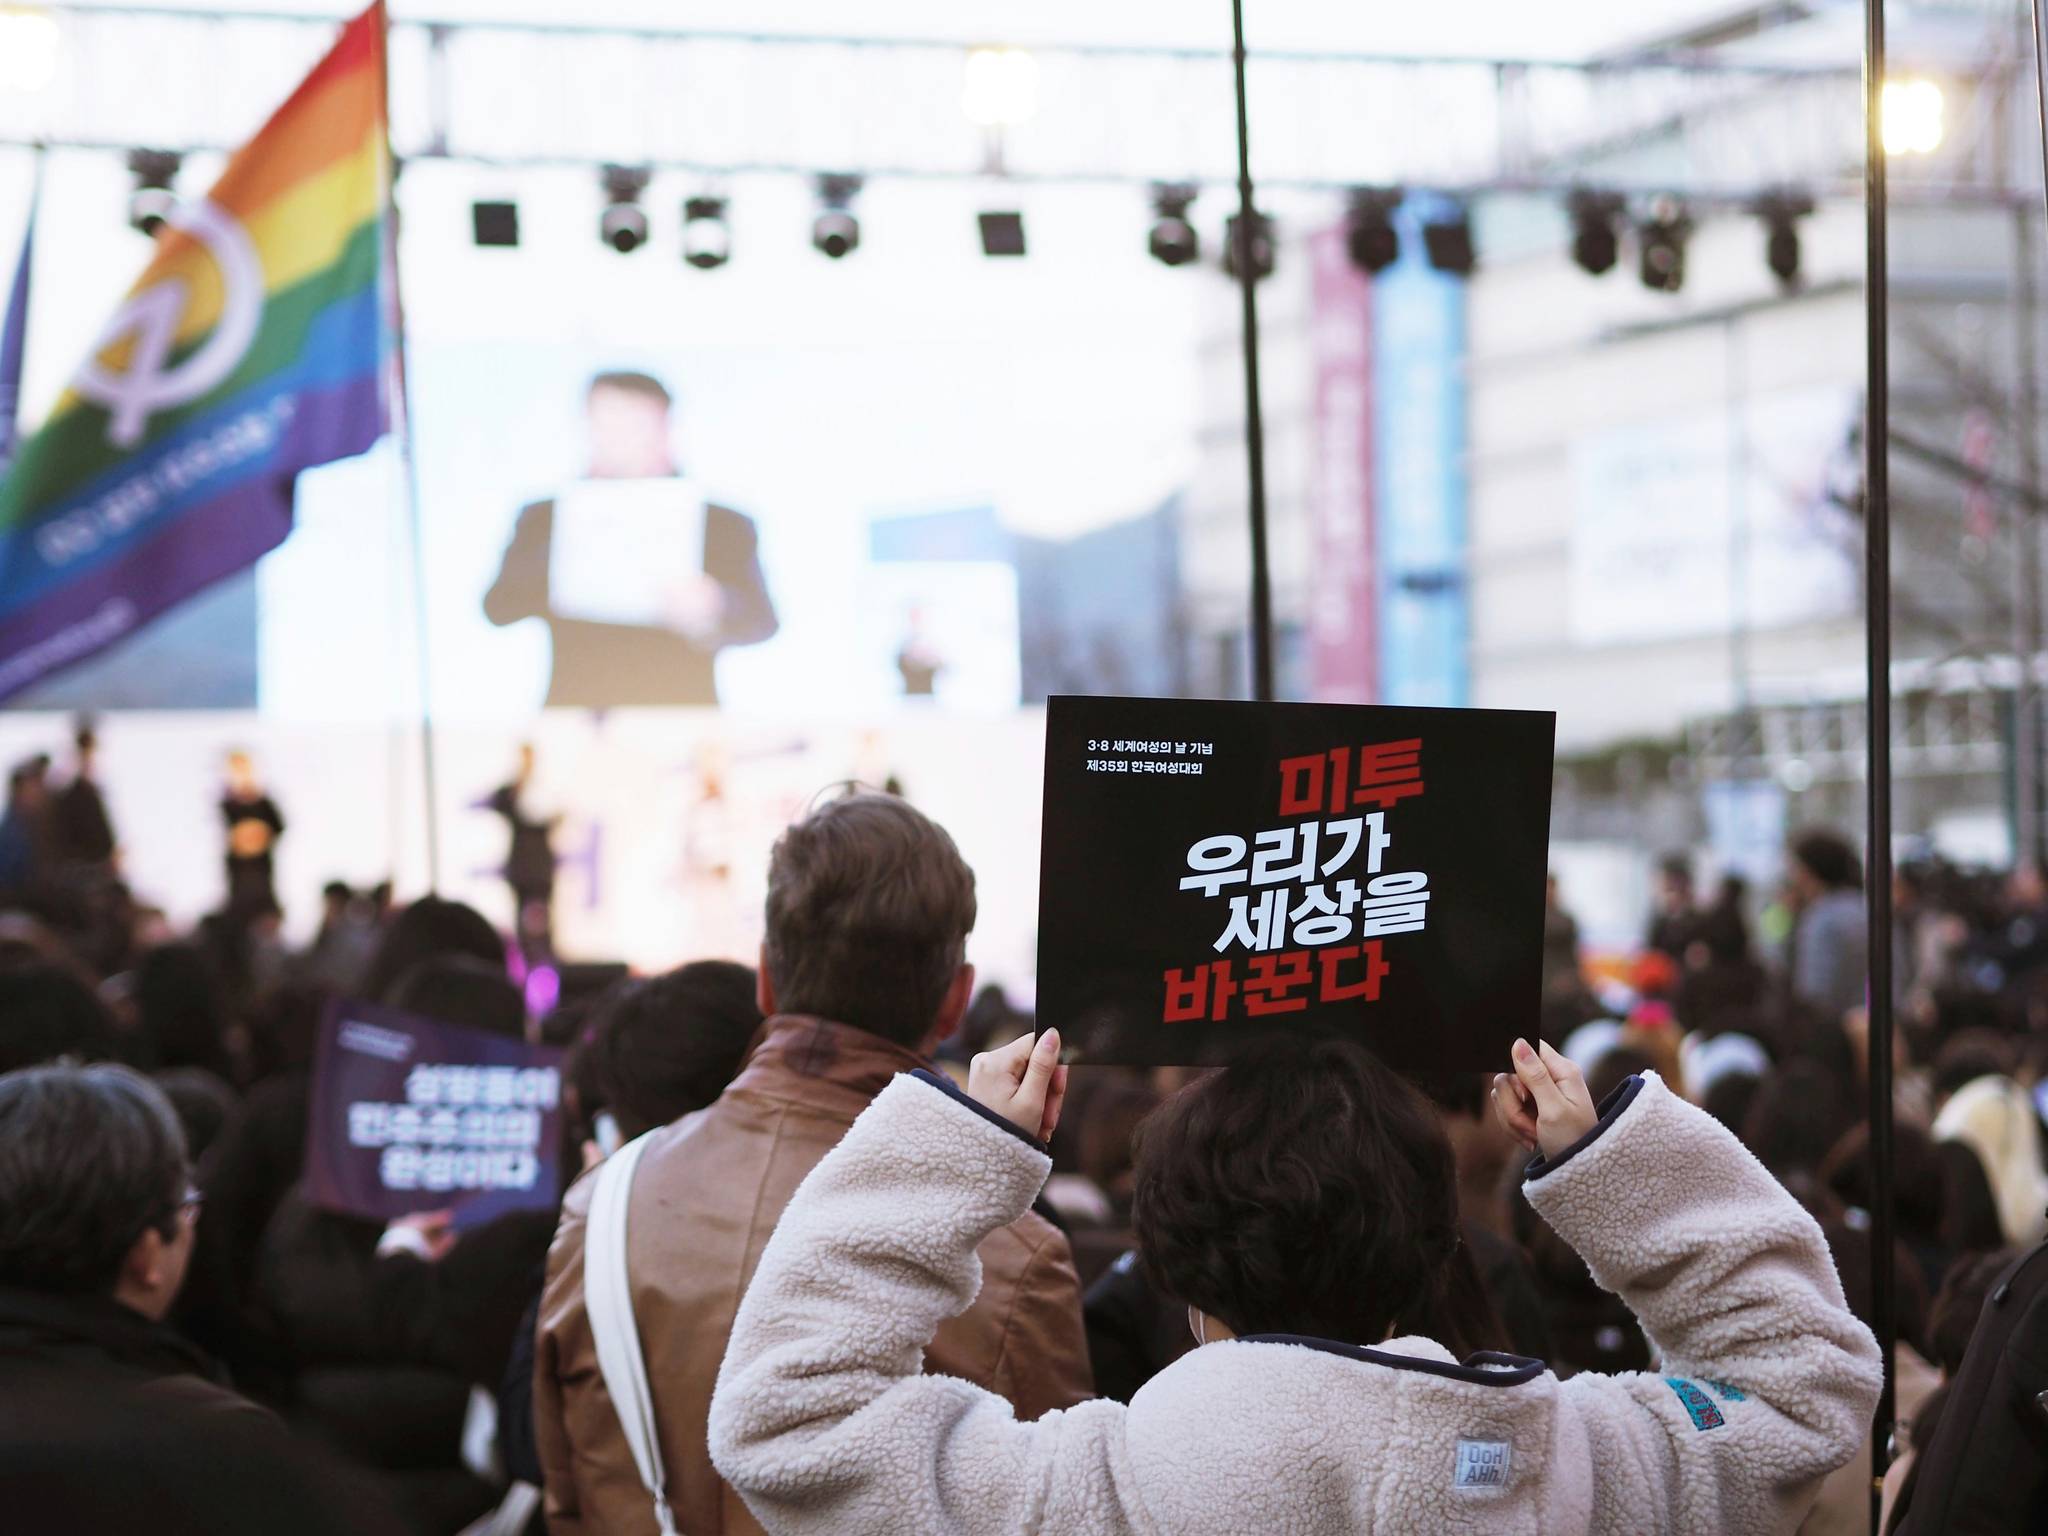 Echo chambers deepen ideological division in South Korea